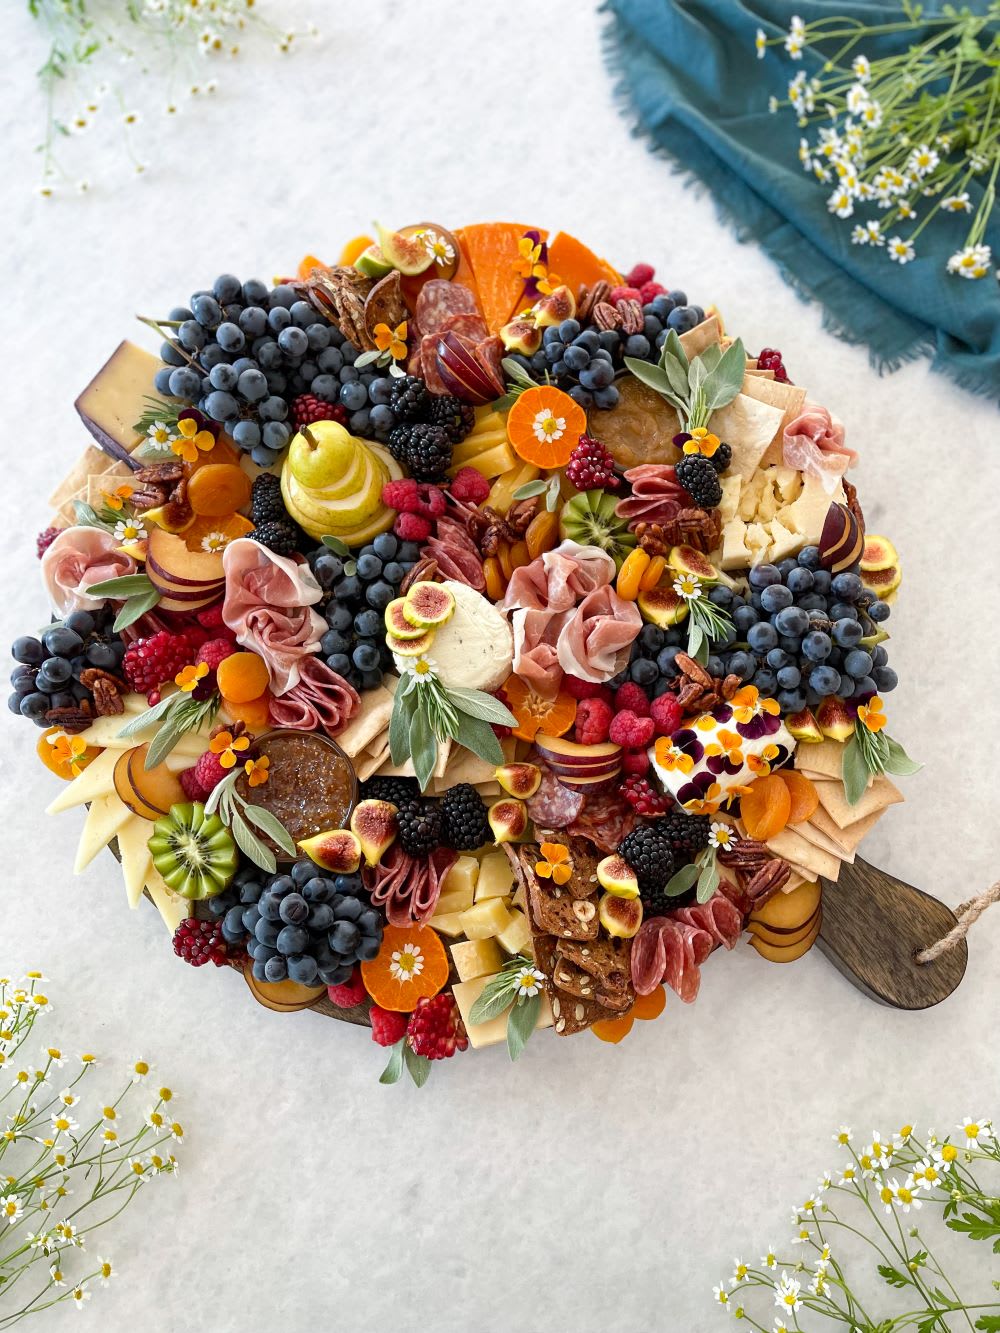 Bridal Shower Food Idea: How to Assemble A Gorgeous Cheese Board - Lulus.com Fashion Blog